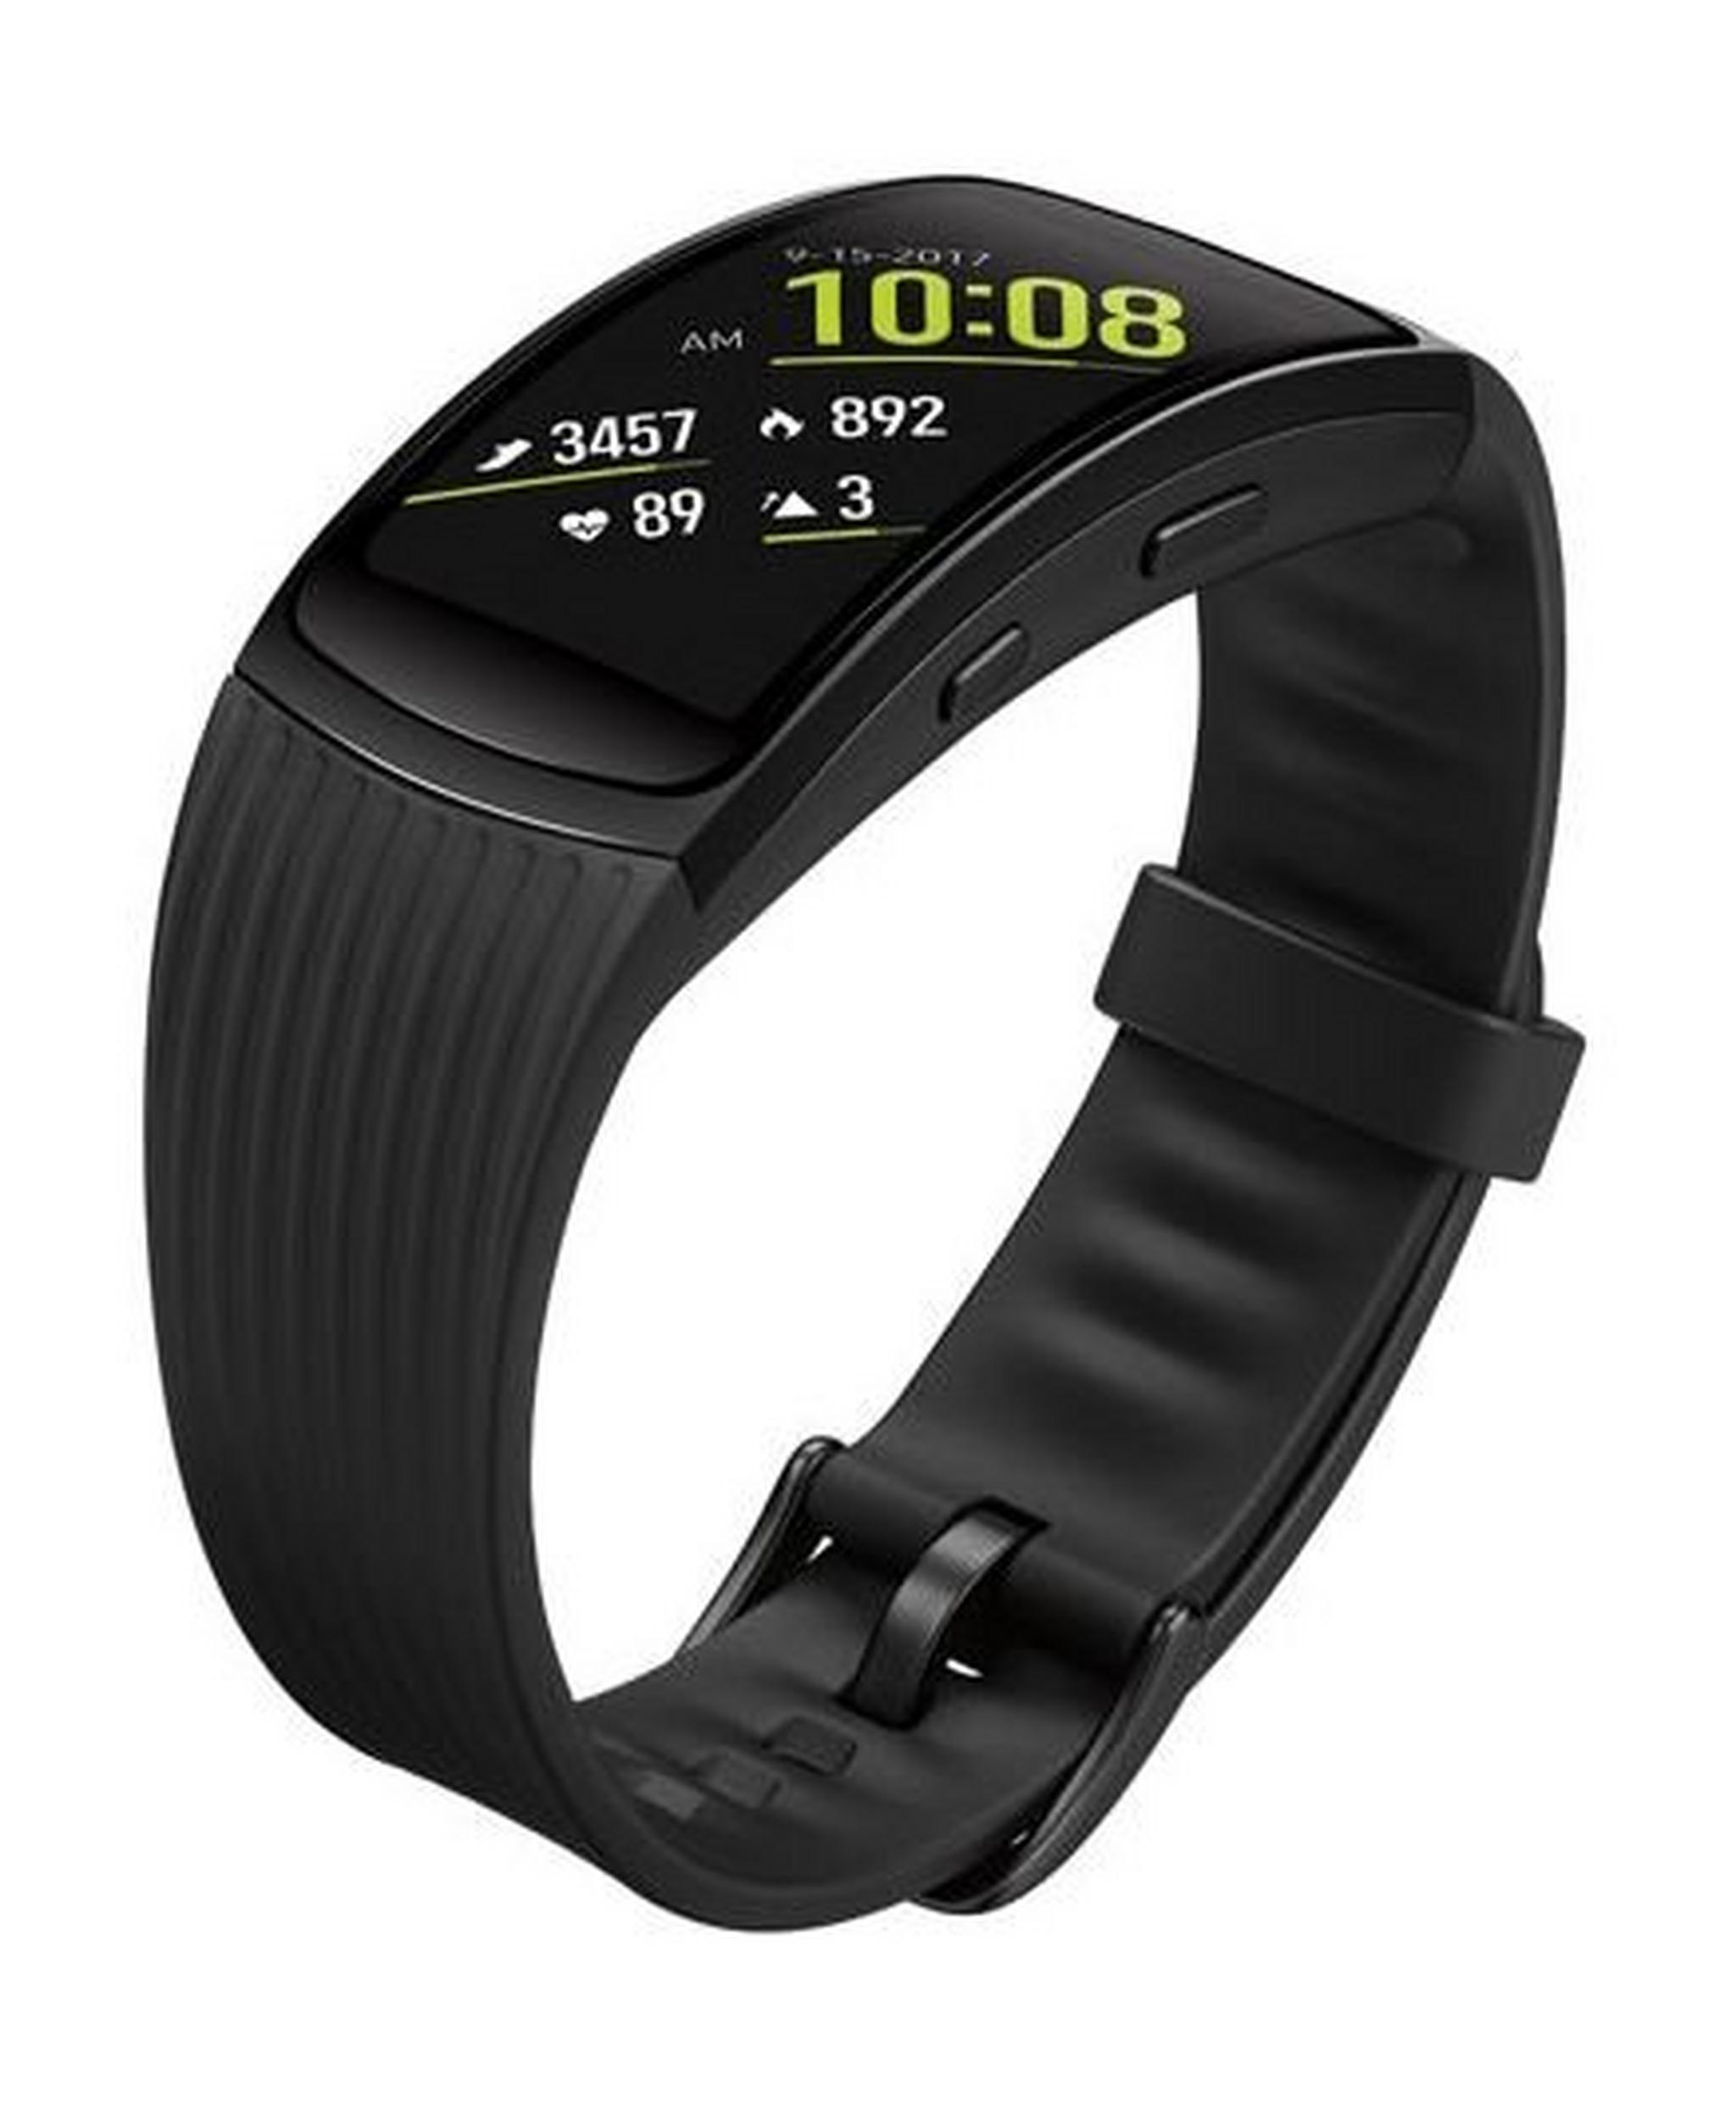 Samsung Gear Fit2 Pro Fitness Watch - Large/Black